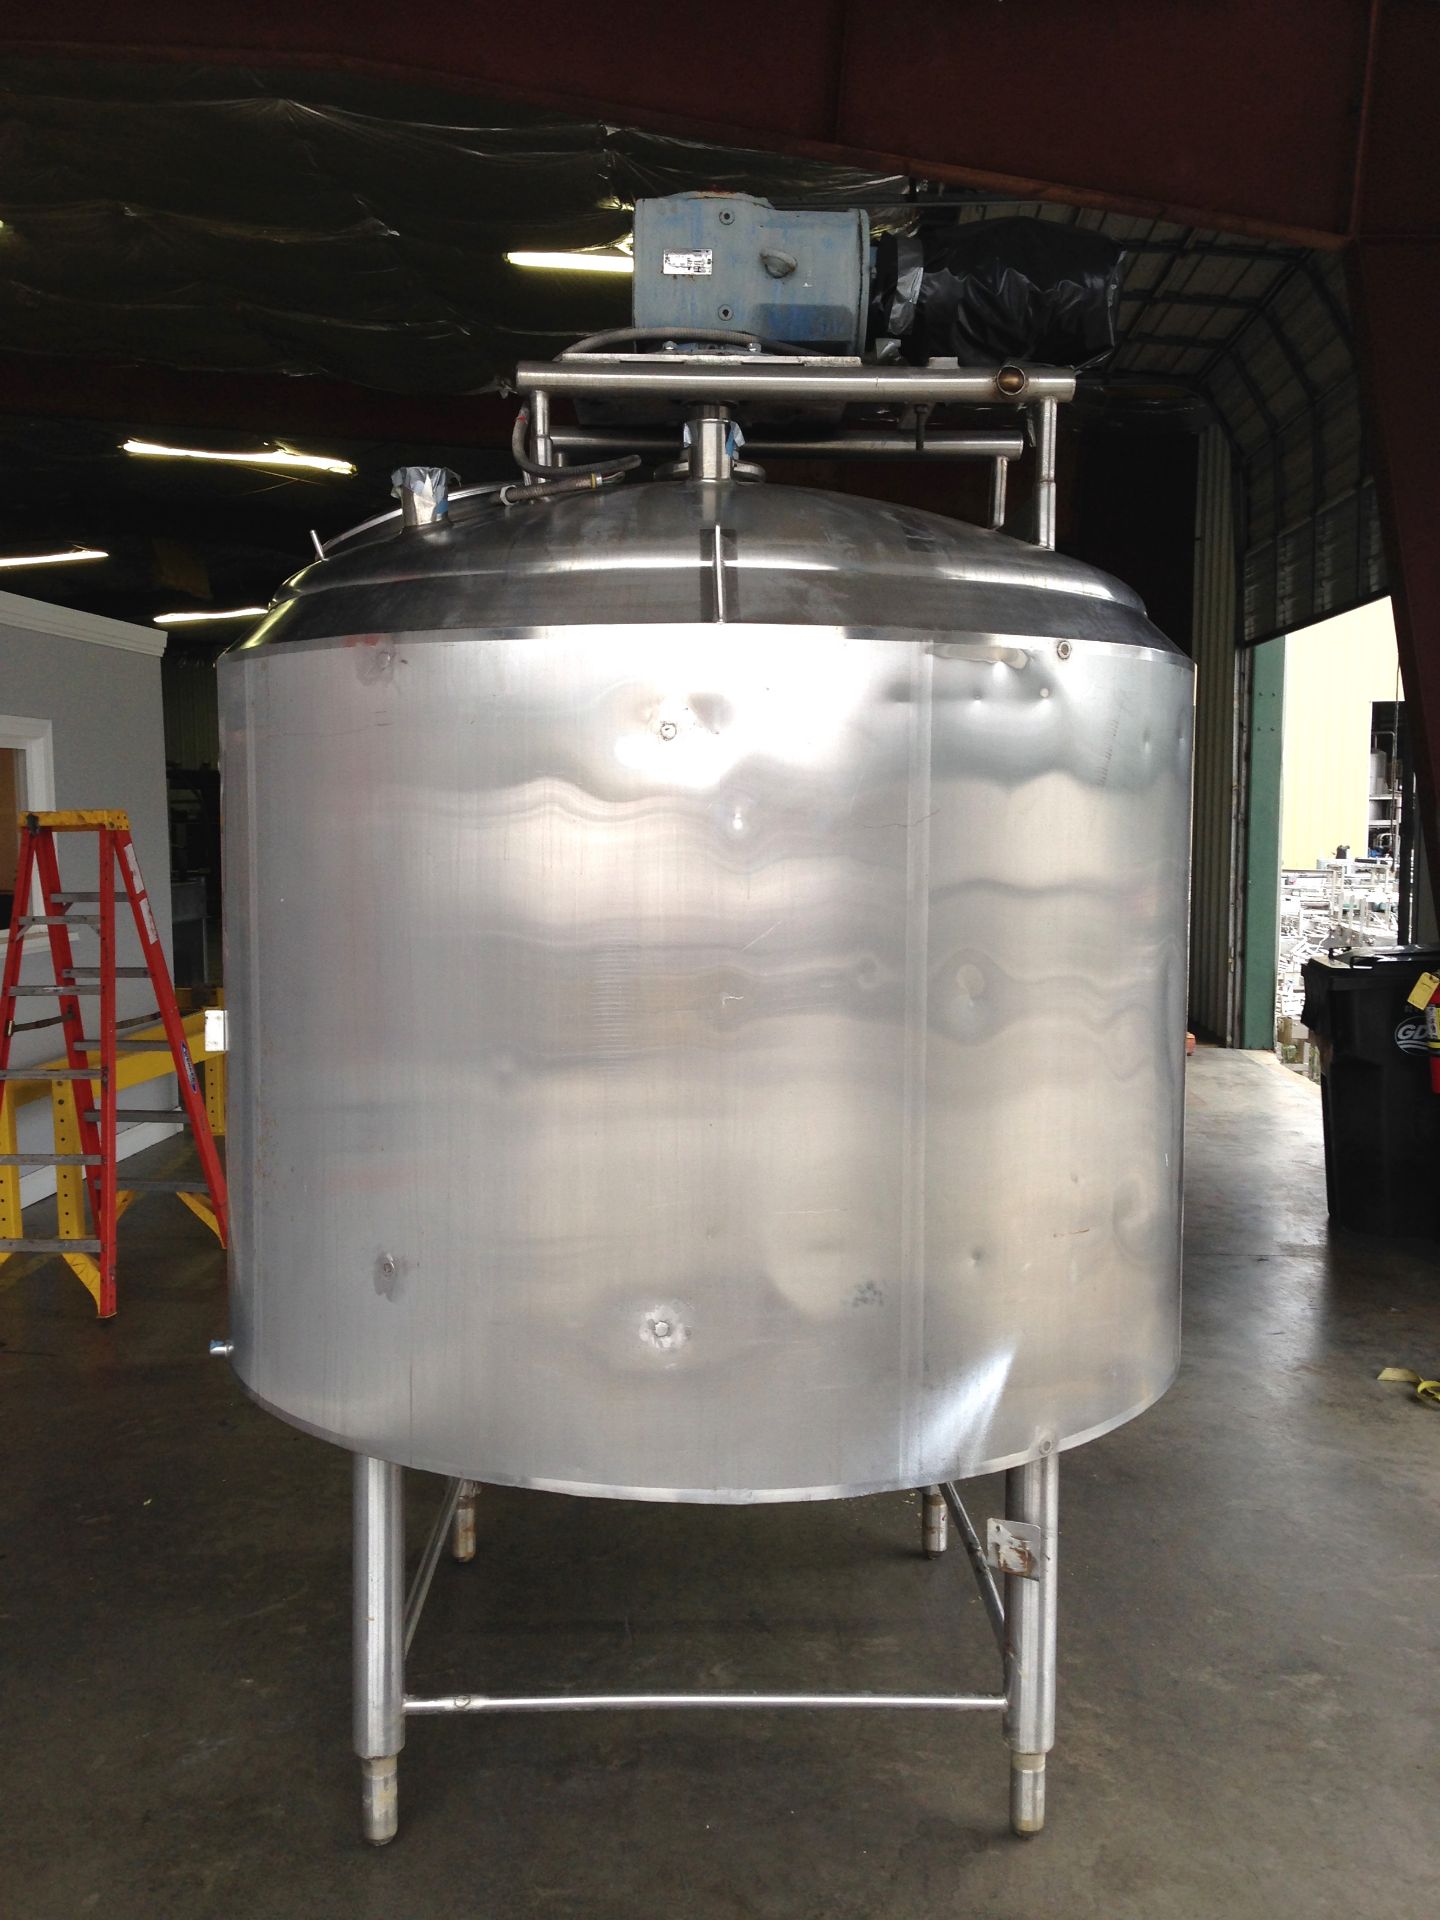 Cherry-Burrell 500 Gallon Jacketed Processor Tank Serial: E-313-90 Year: 1990316L Stainless Steel - Image 4 of 10